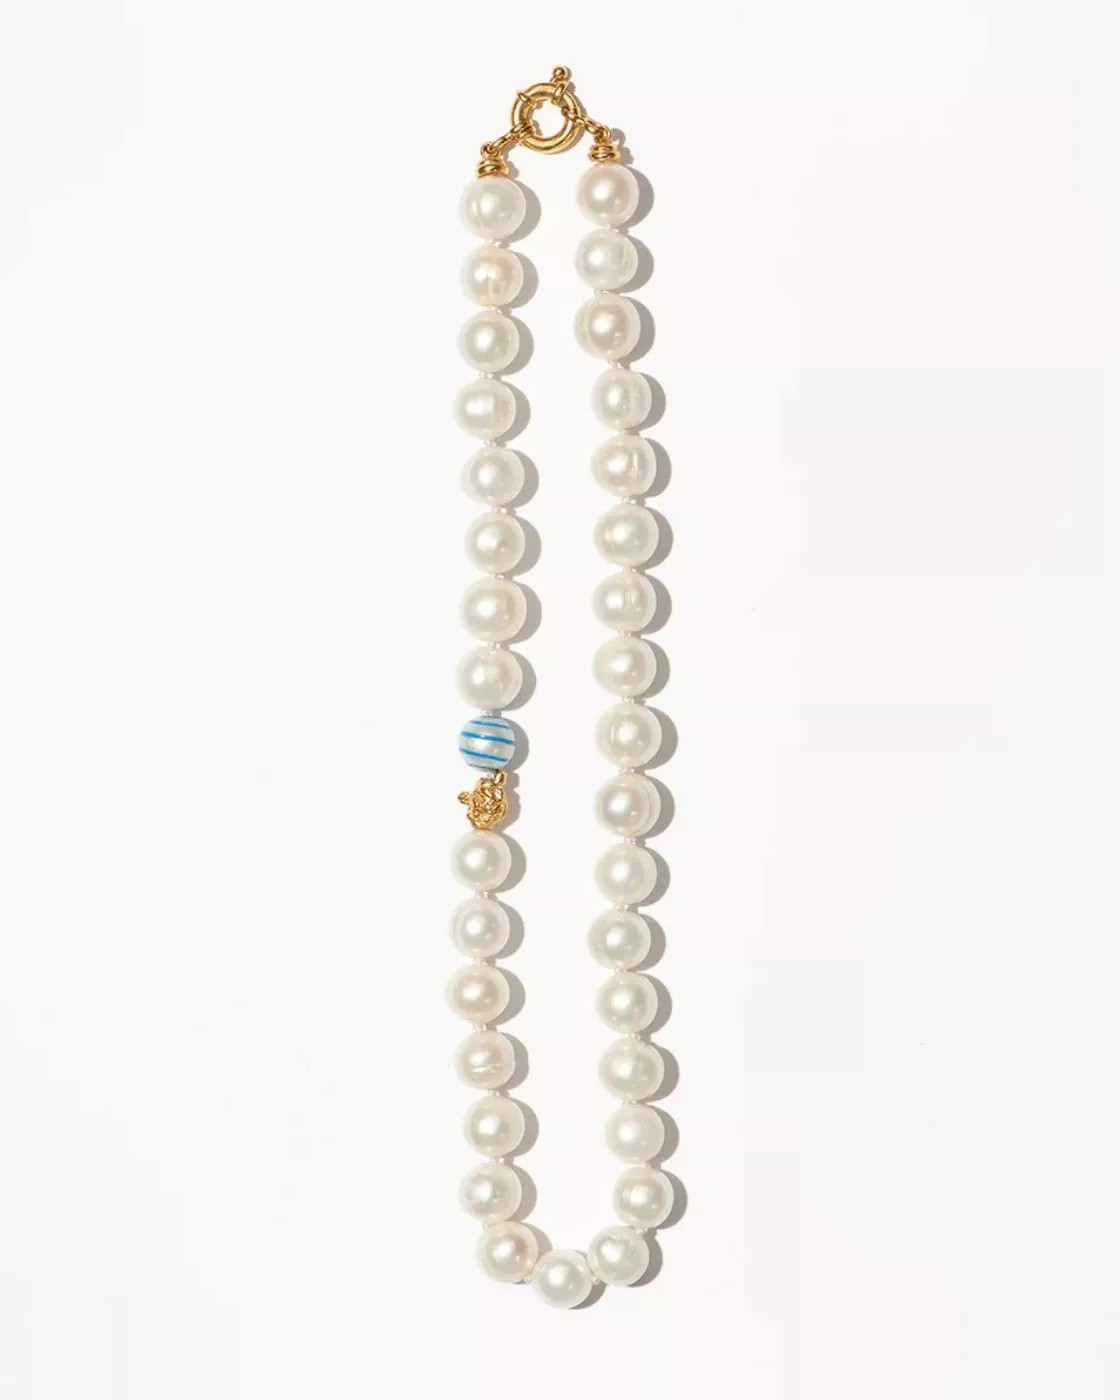 The Classic Pearl Necklace Small - Blue Stripes